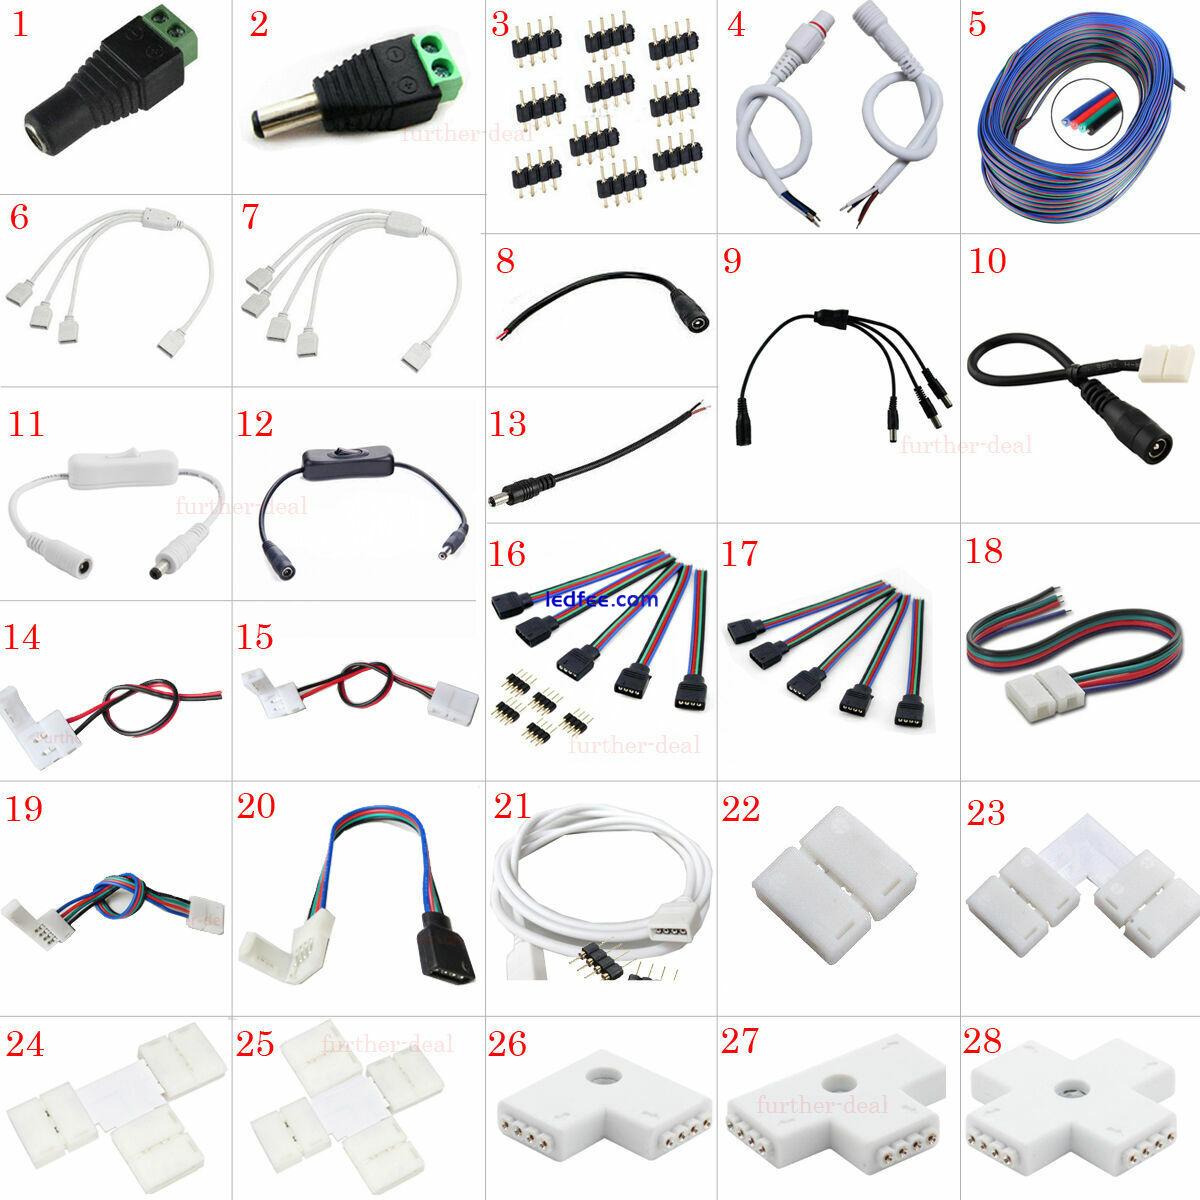 LED Strip Light Connector Adapter Cable PCB Clip Solderless 3528 5050 5630 RGB 0 